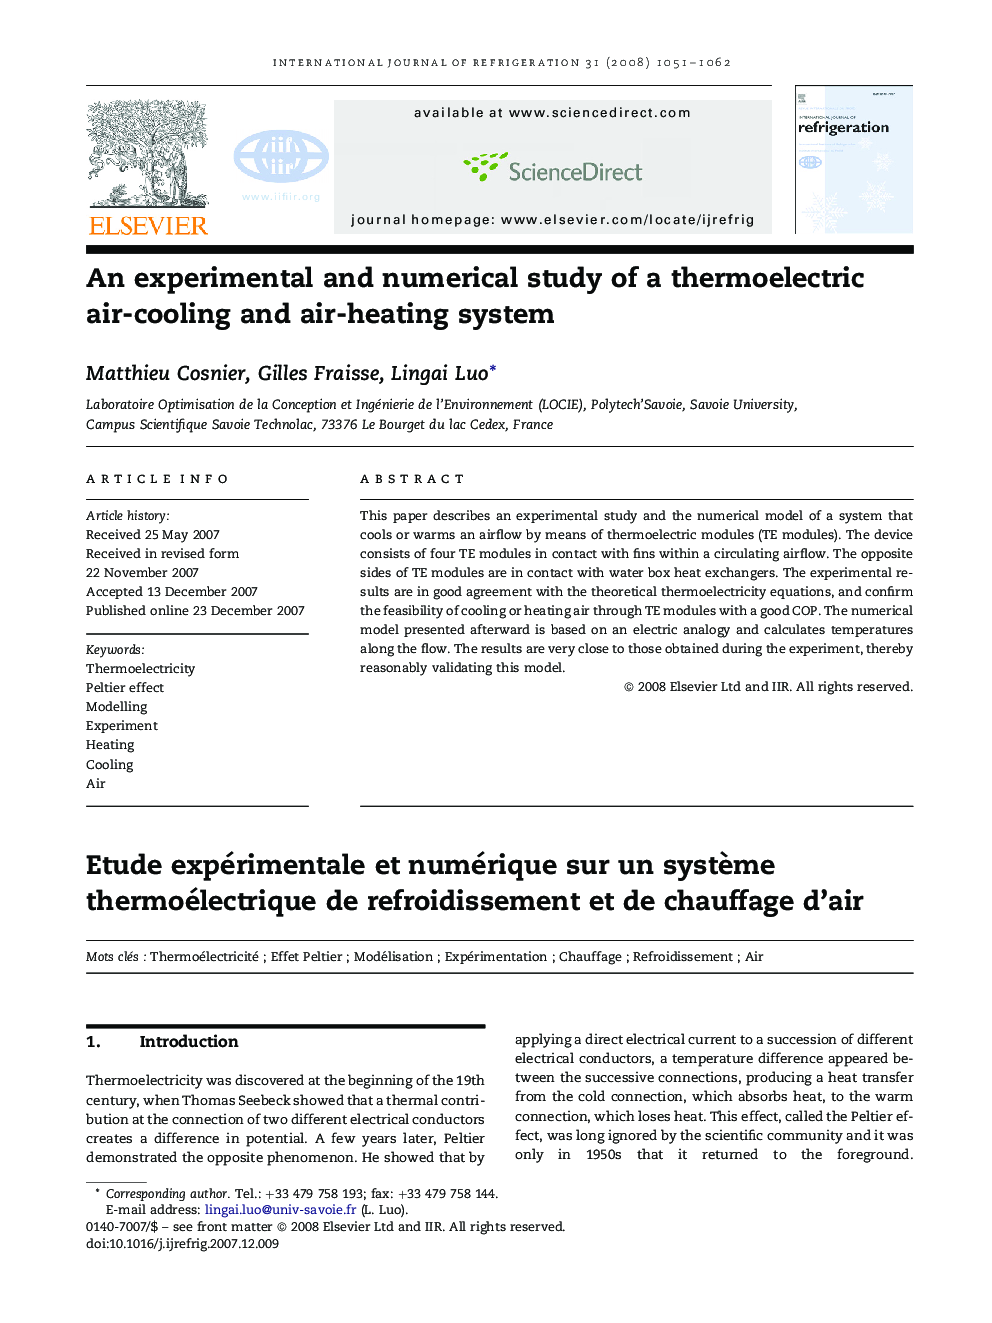 An experimental and numerical study of a thermoelectric air-cooling and air-heating system